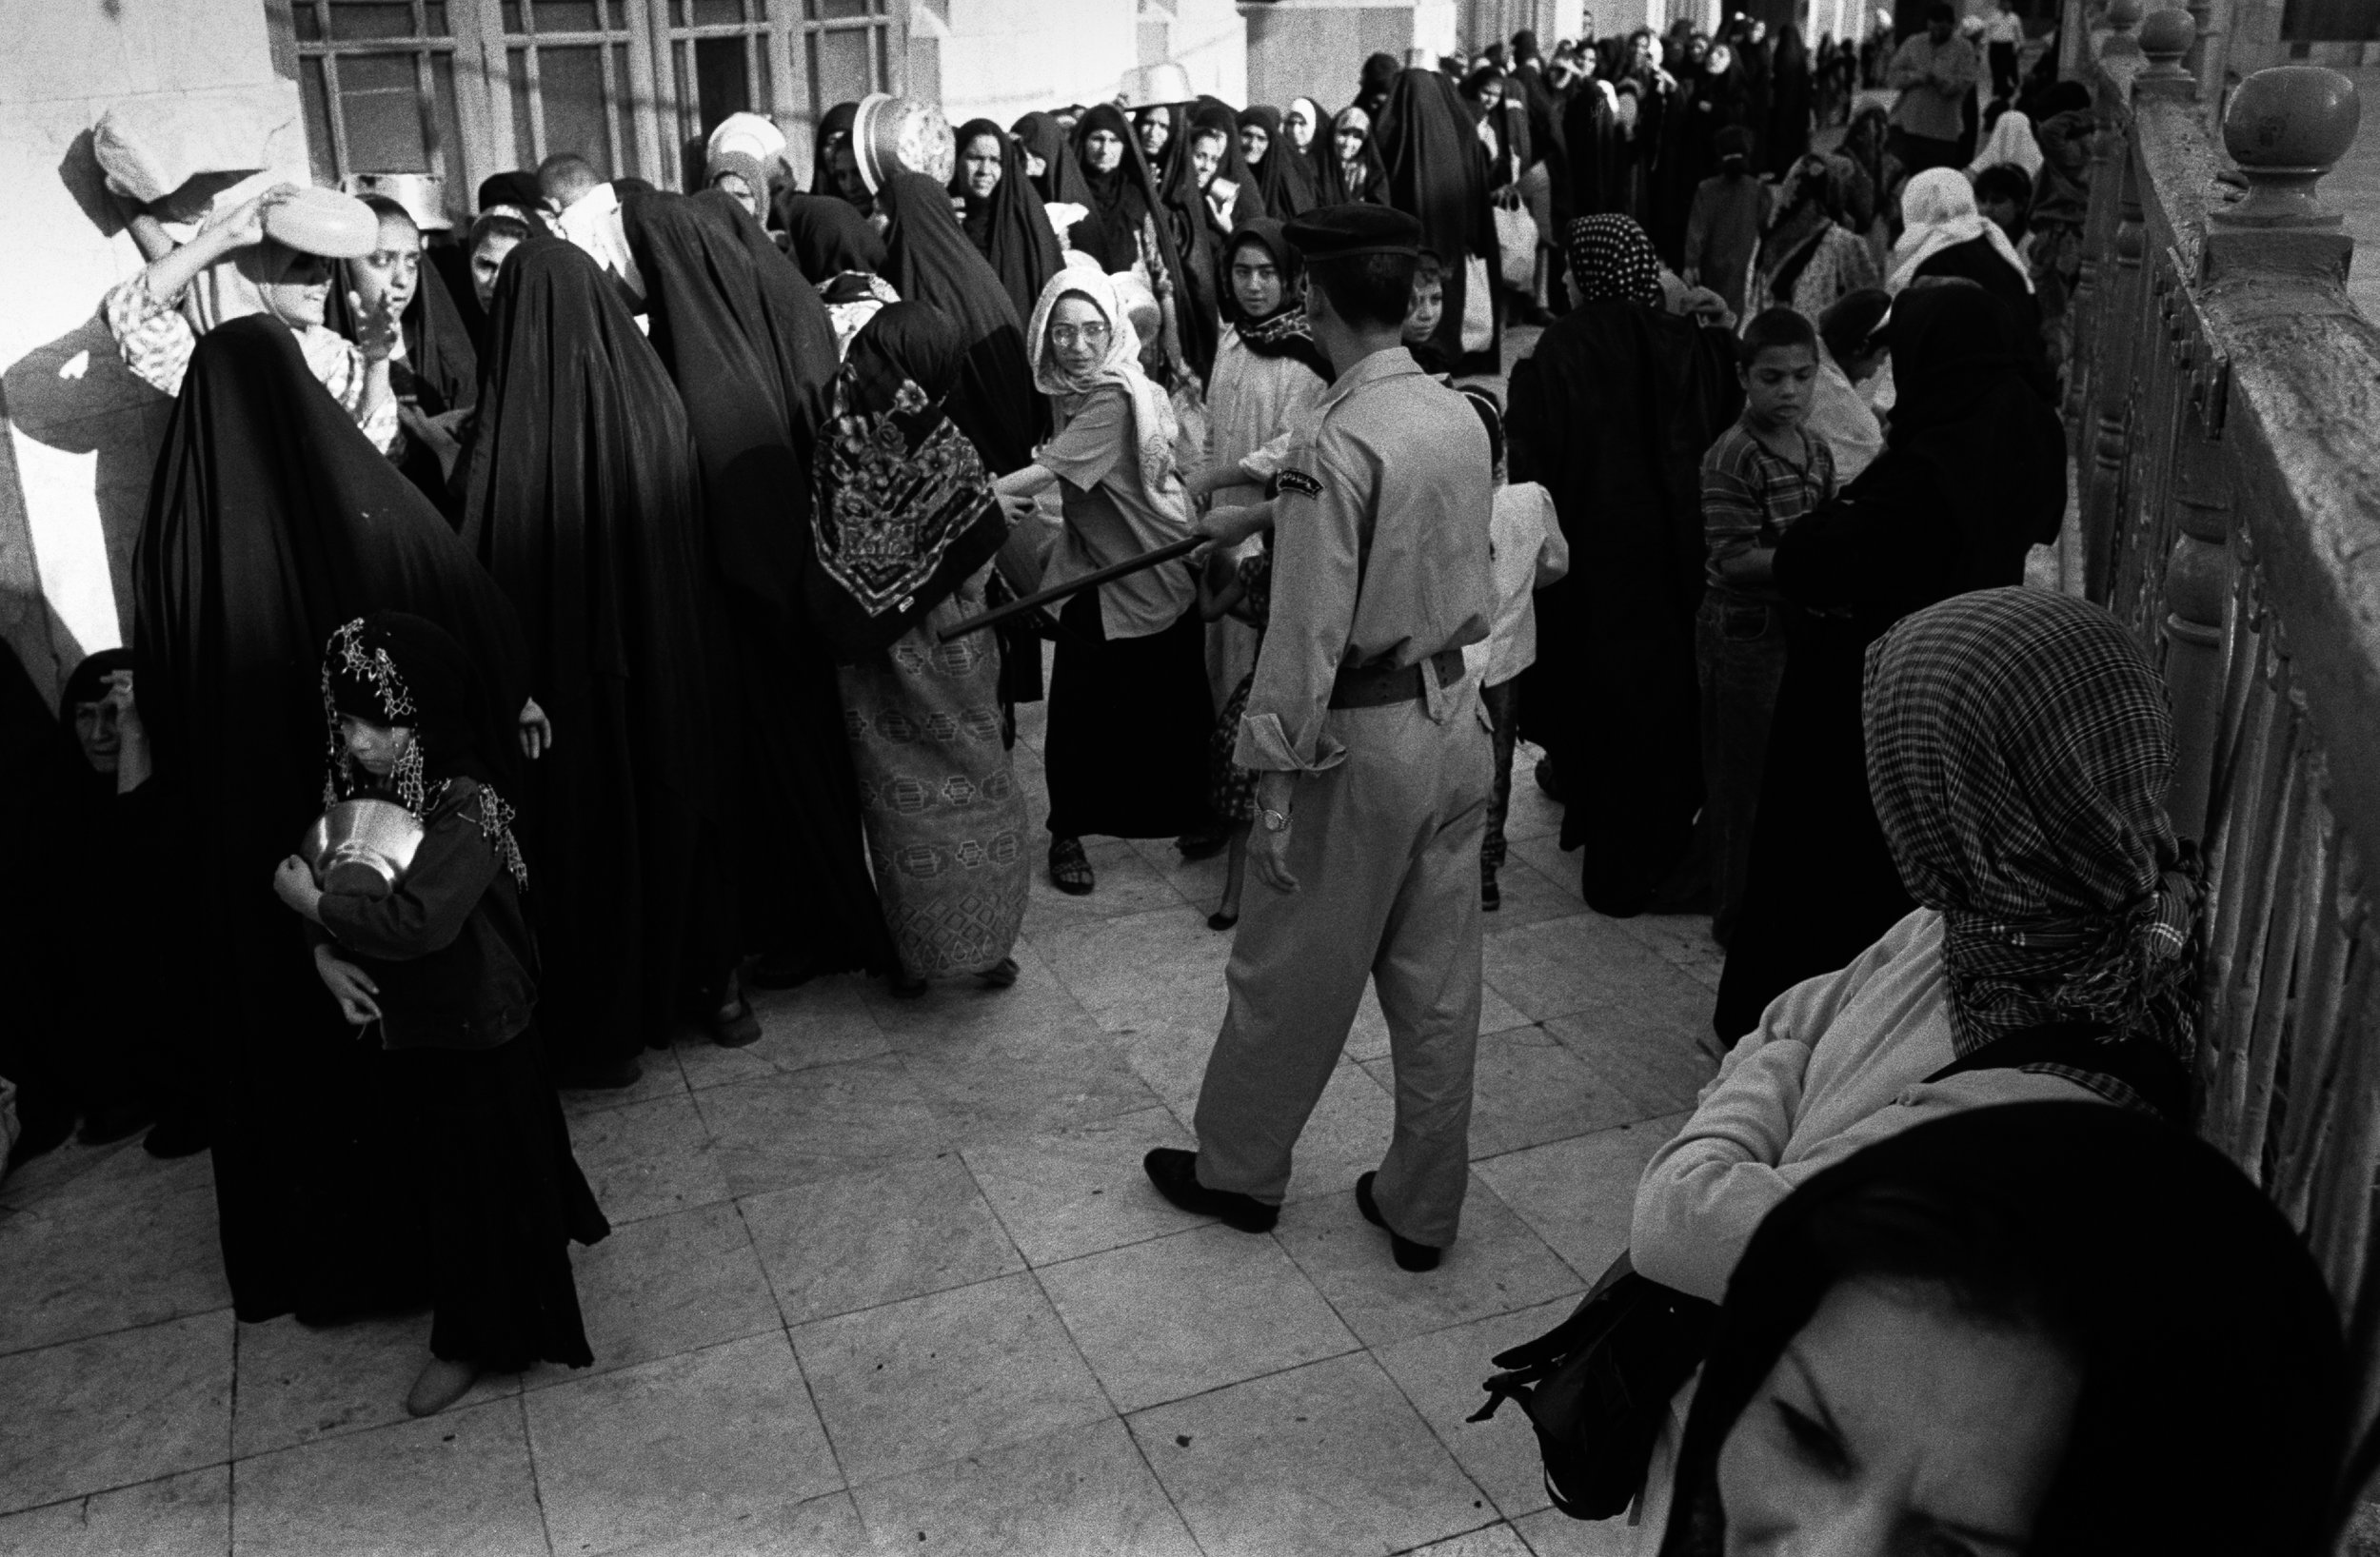  At the Al-Khazani Mosque in Baghdad, Iraq women wait for a free meal as a policeman keeps them in line. 